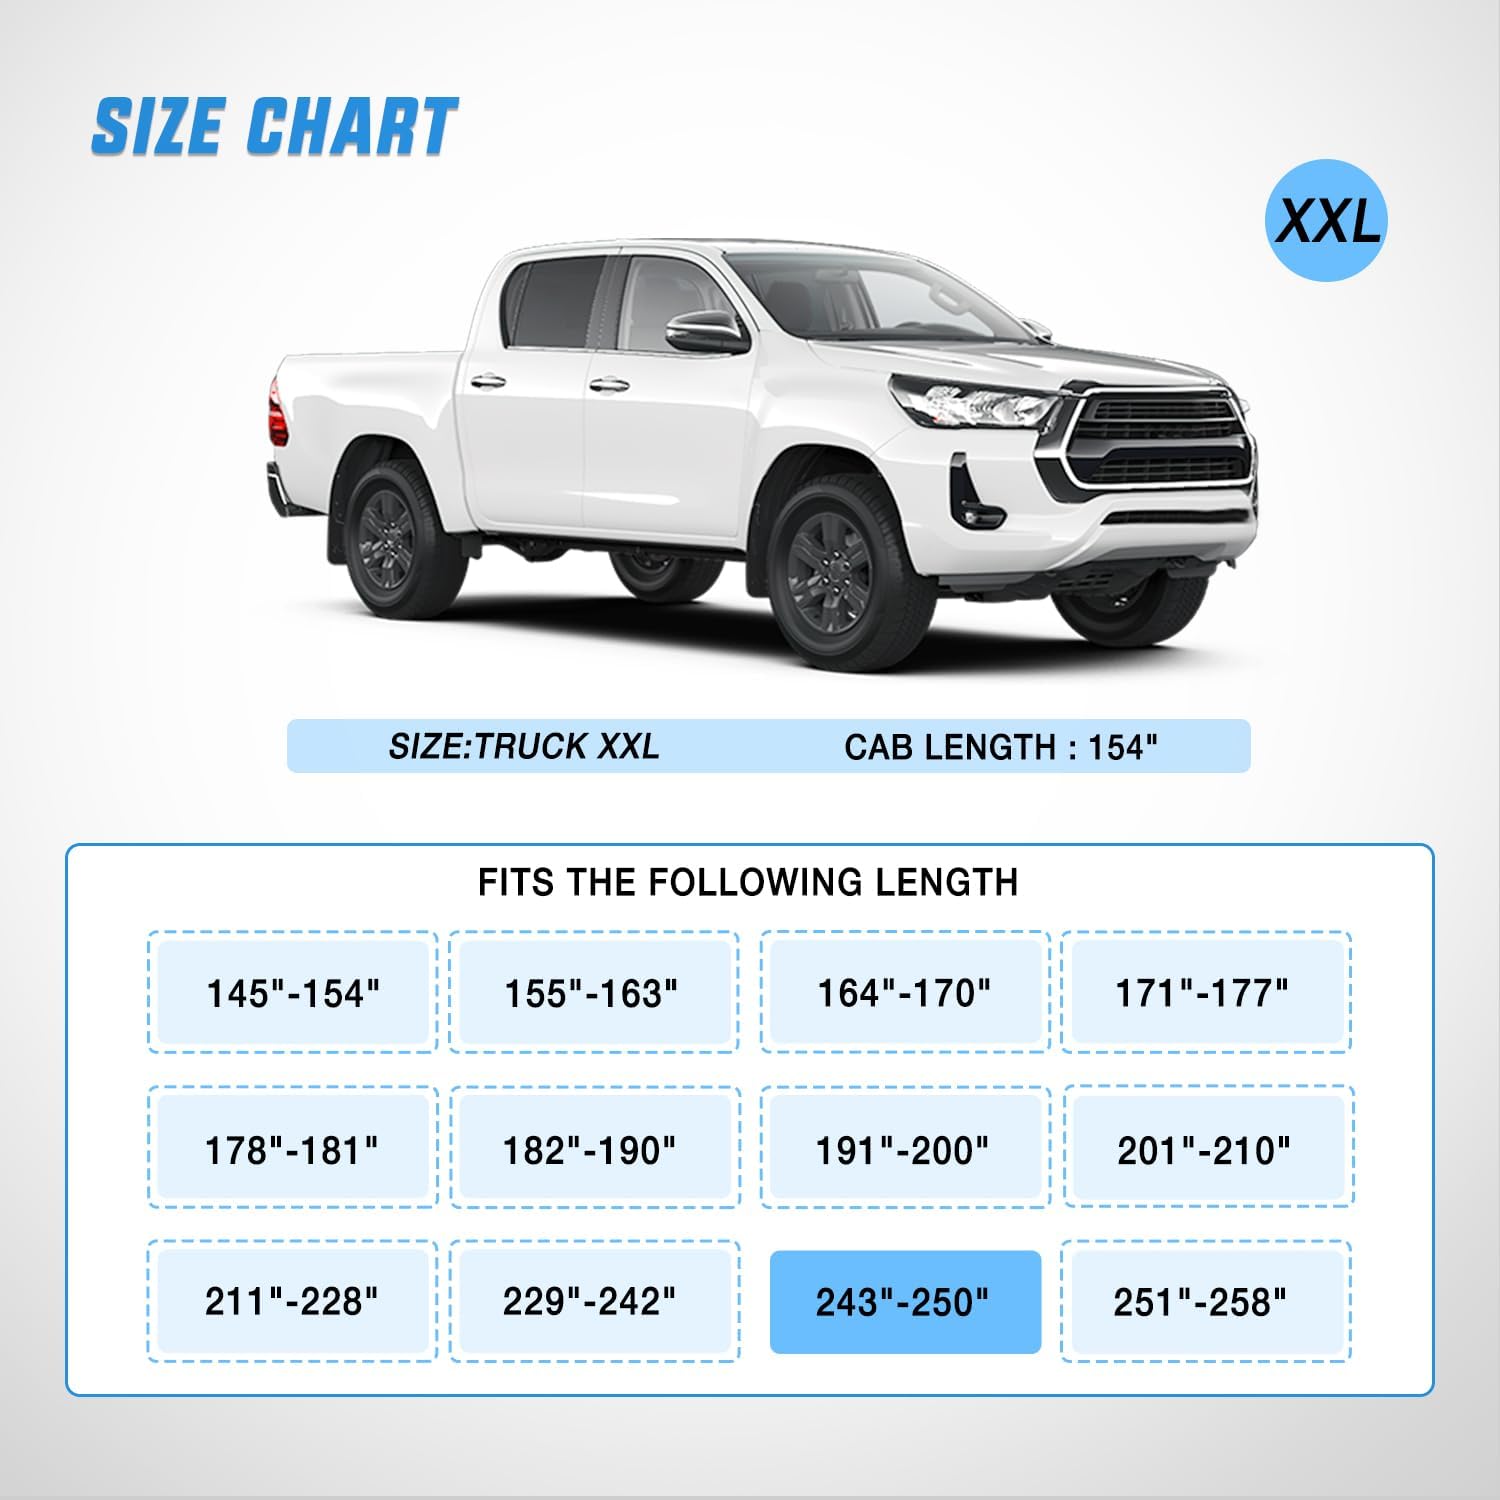 Universal Fit for Truck (Up to 250" Max Cab Length 154") Car Cover UV Protection Nilight